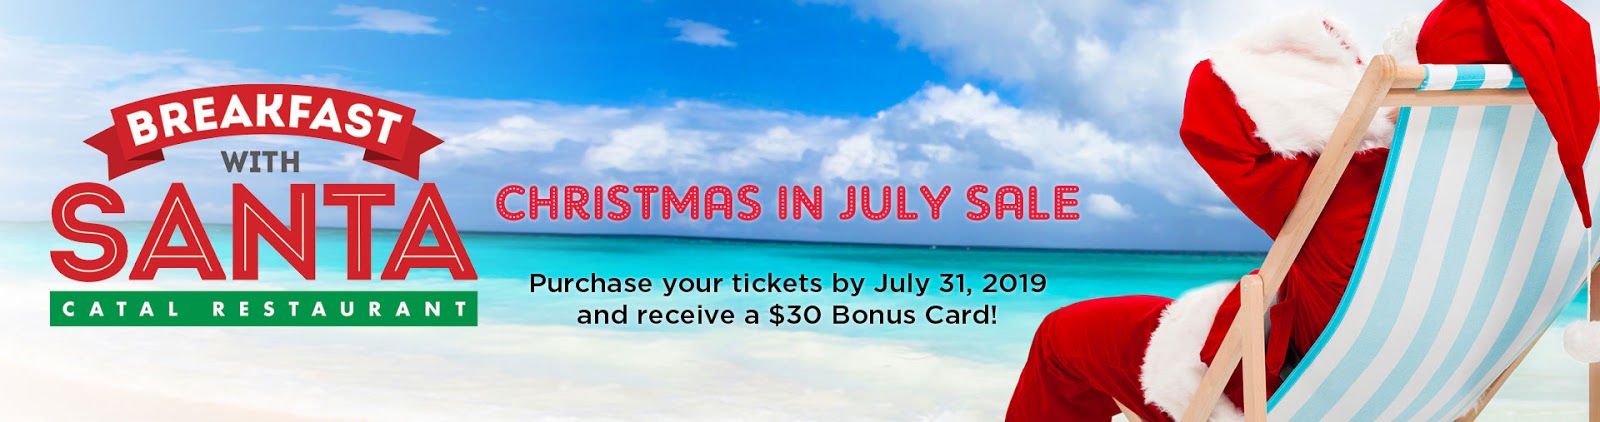 Reserve Today | Breakfast with Santa at Catal Restaurant | Christmas in July Sale